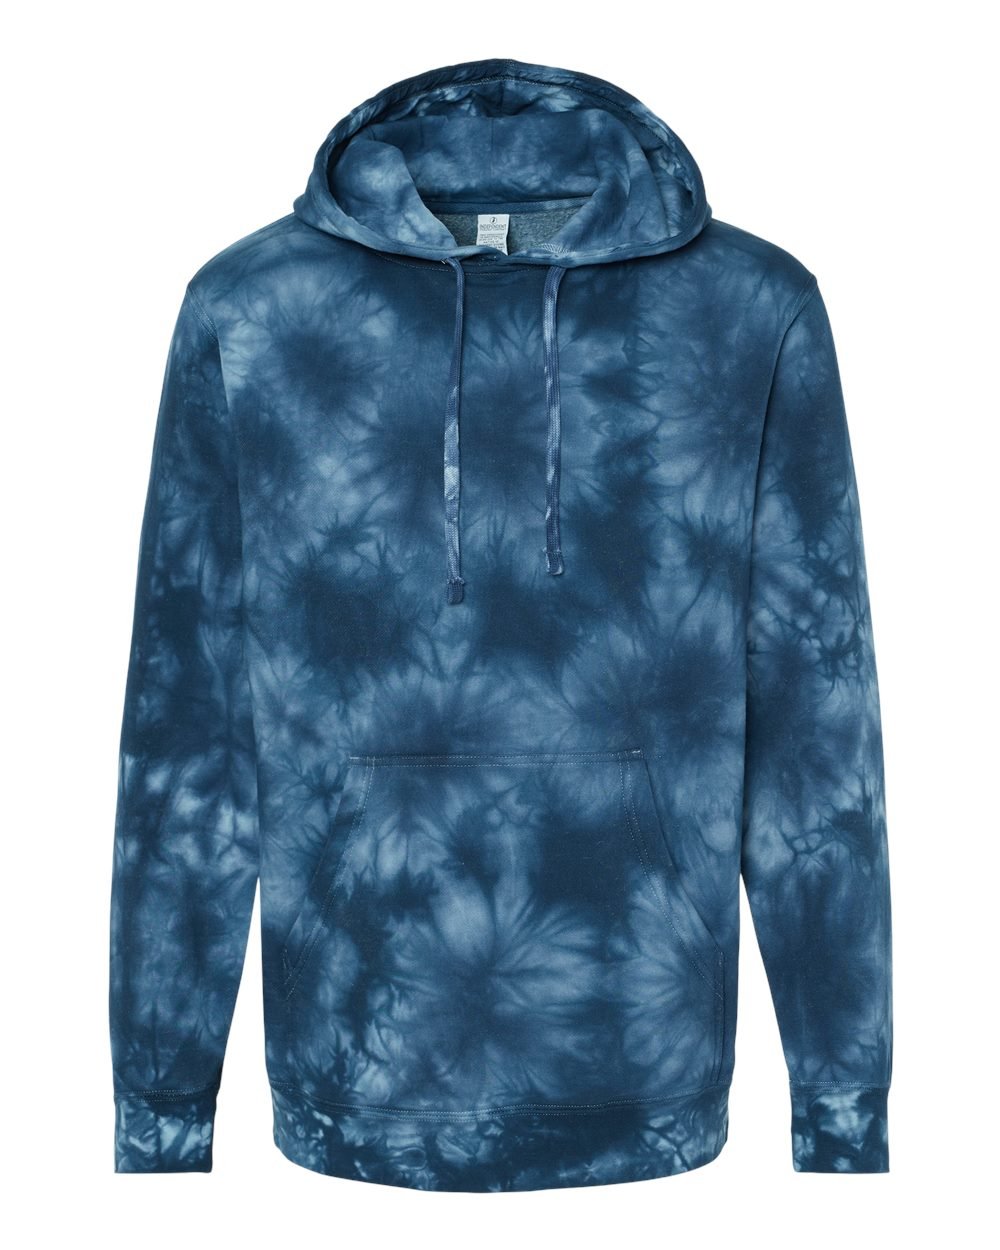 Independent_Trading_Co._PRM4500TD_Tie_Dye_Navy_Front_High.jpg